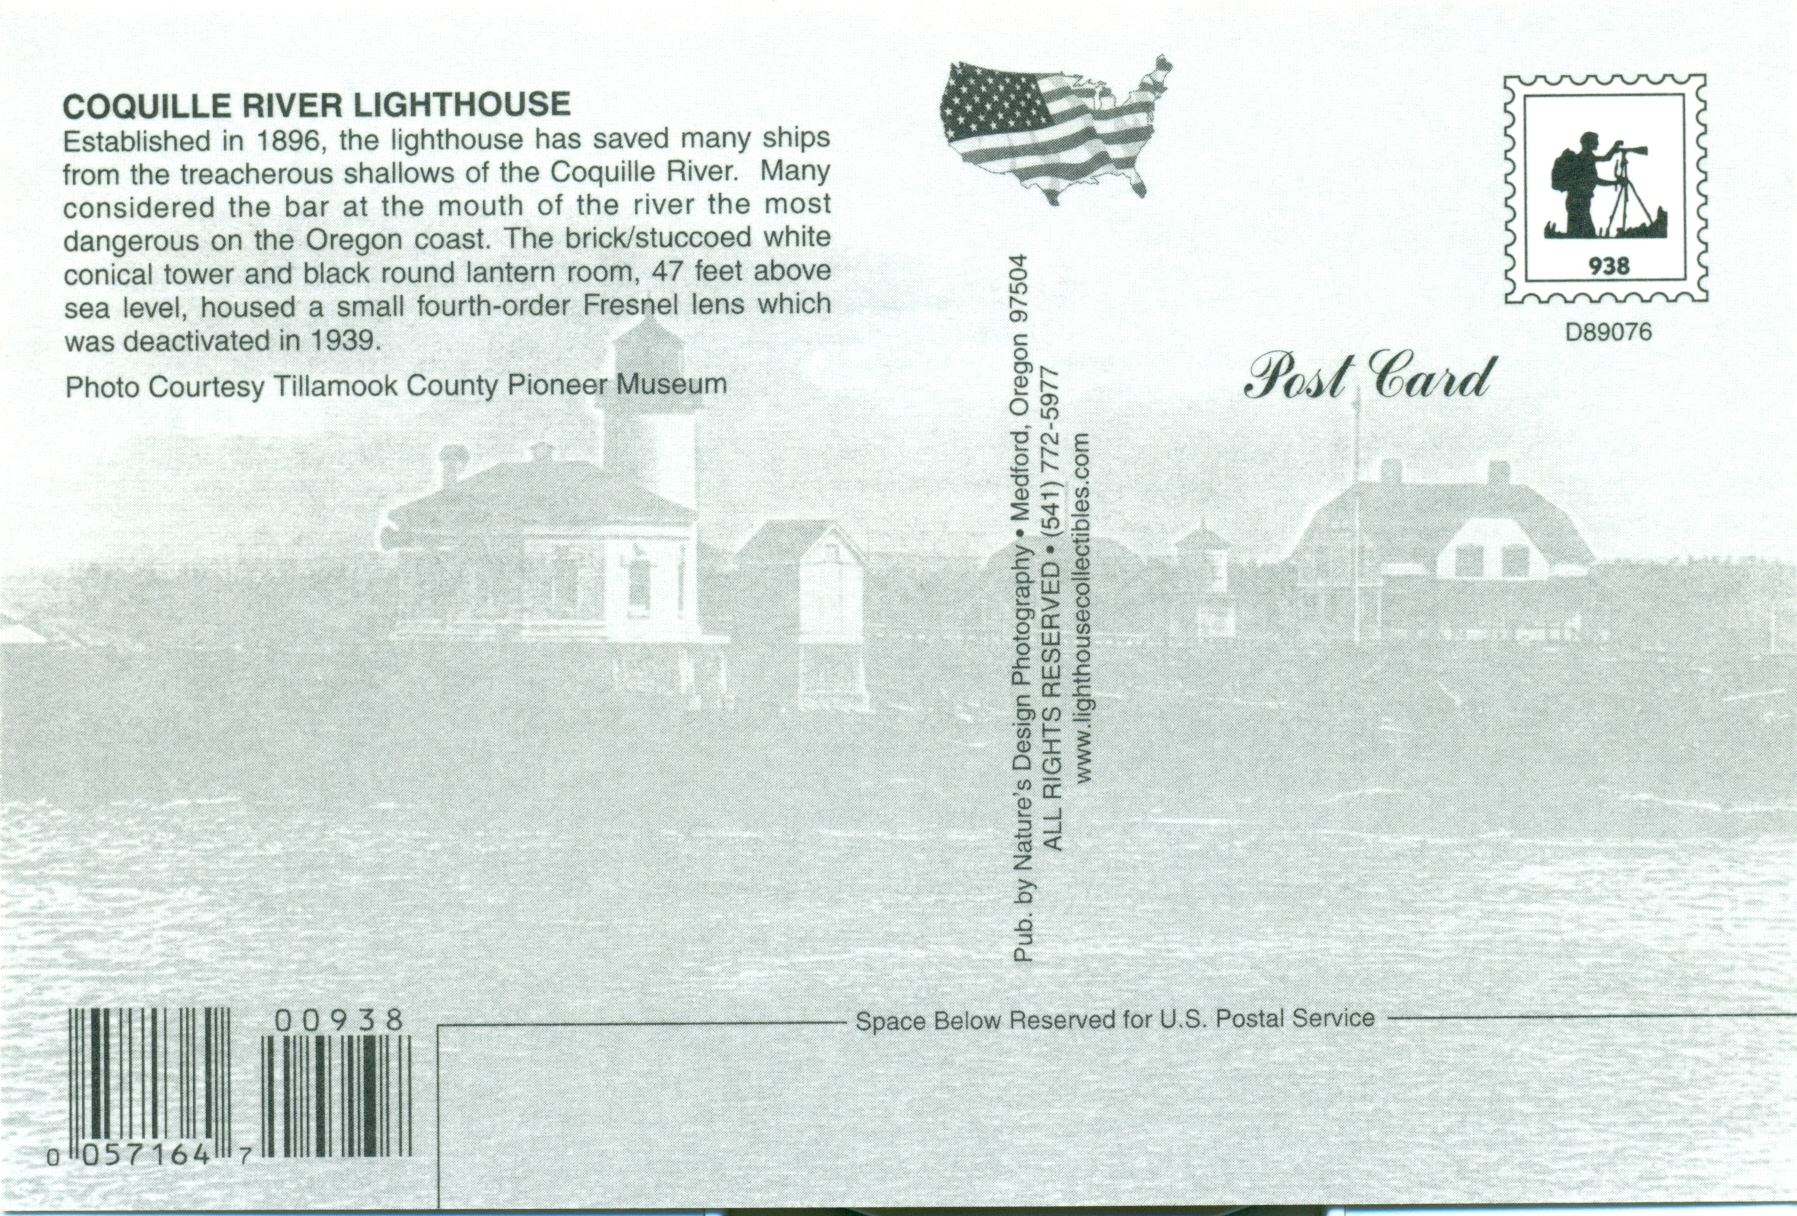 Coquille River Lighthouse Postcard #938 (OR)